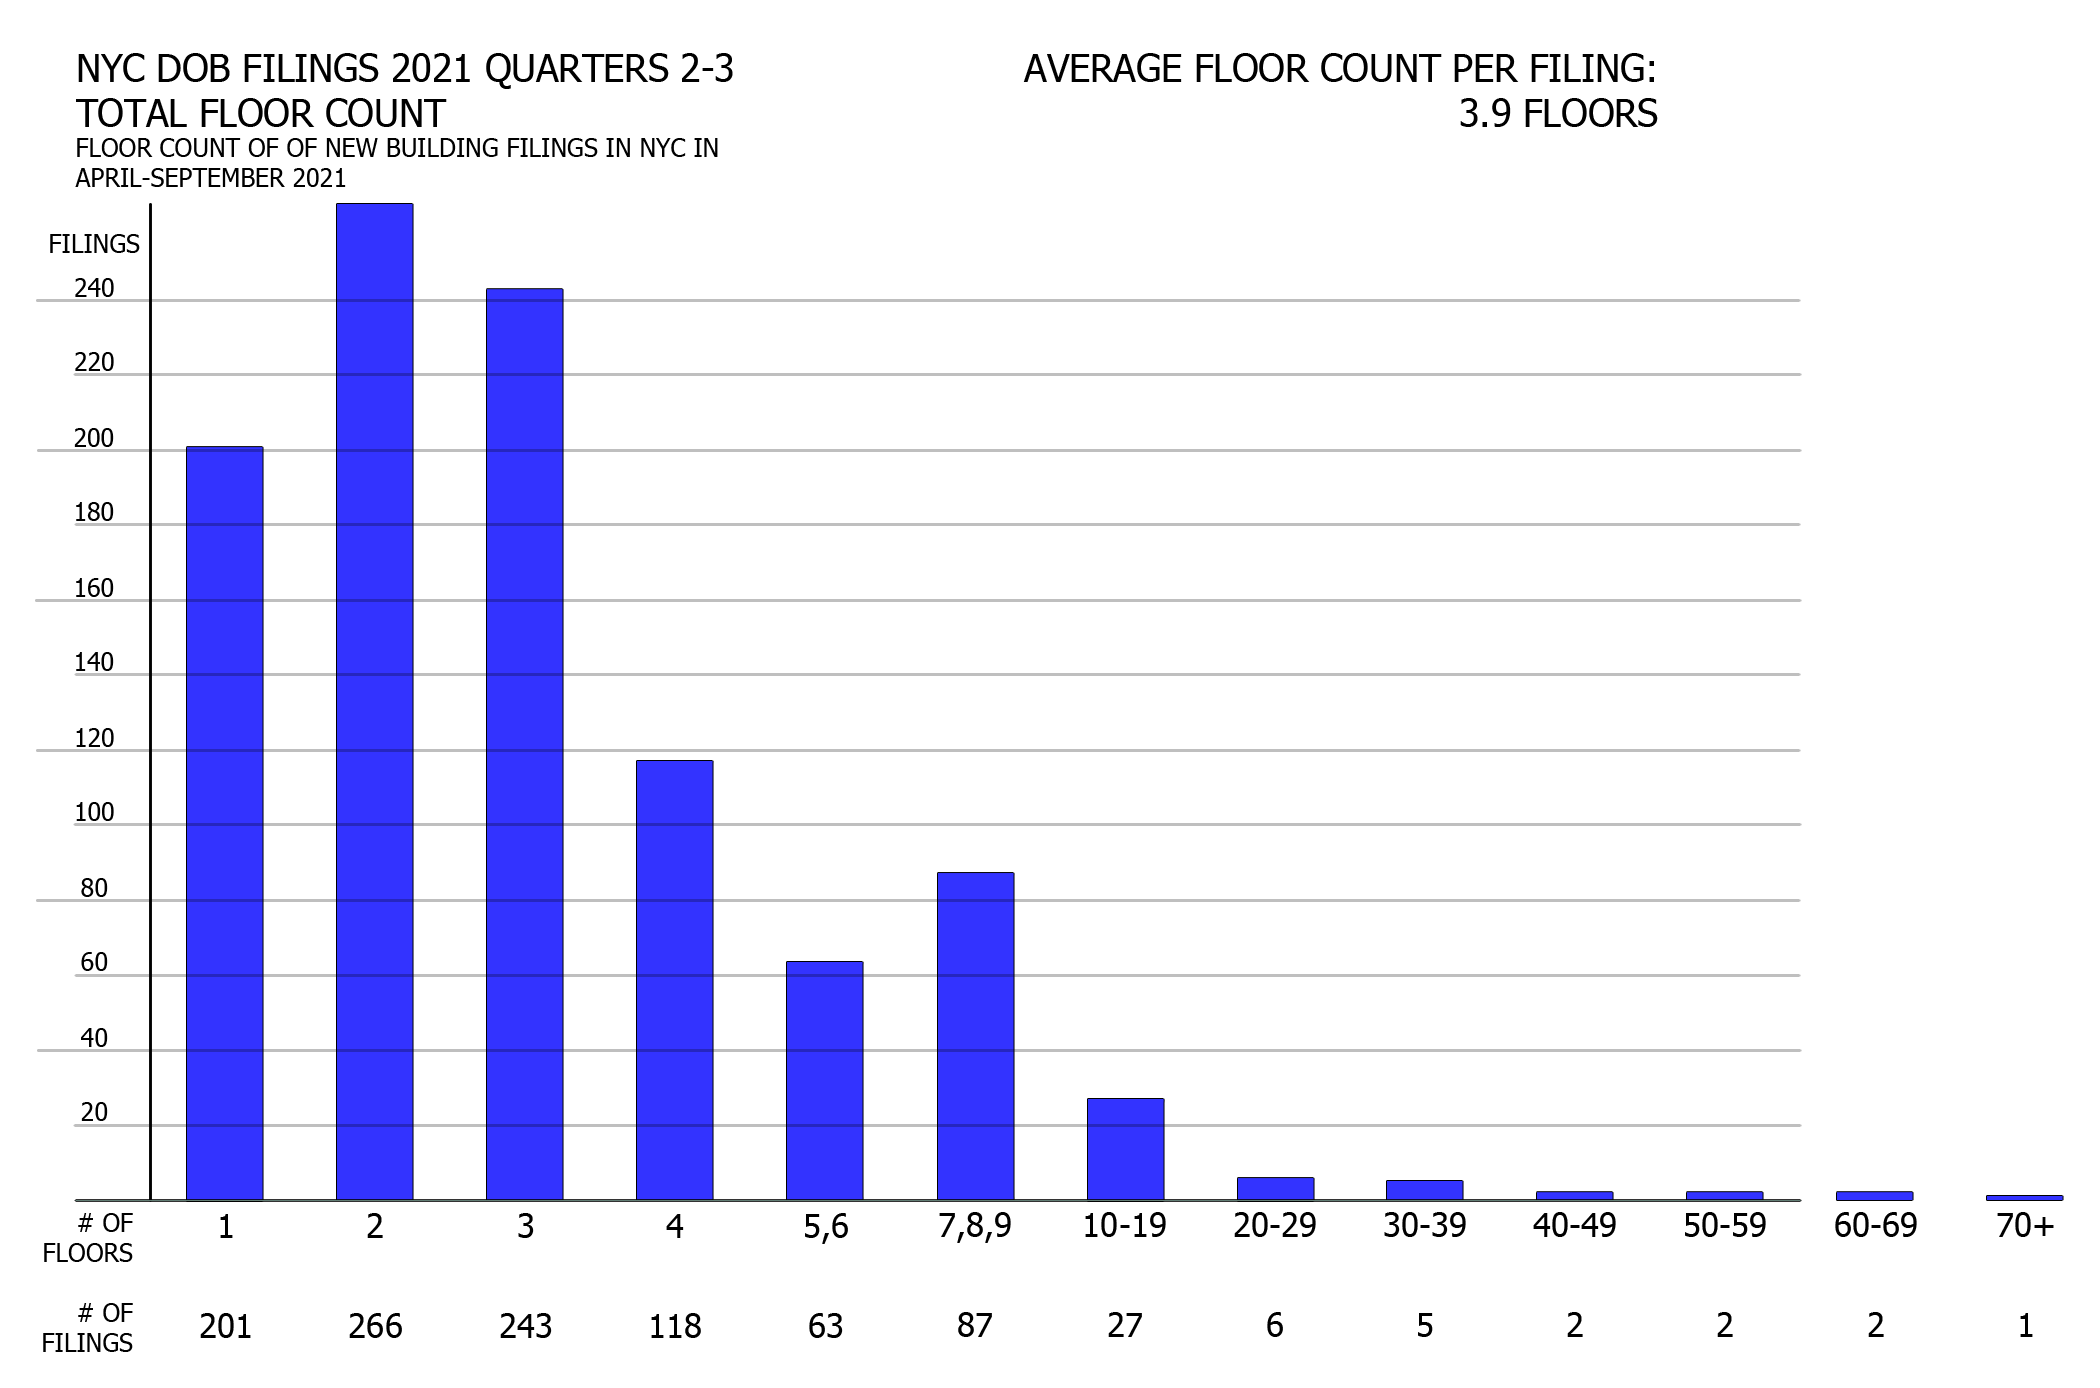 Filings grouped by floor count in New York City 2021 Q2-Q3. Credit: Vitali Ogorodnikov